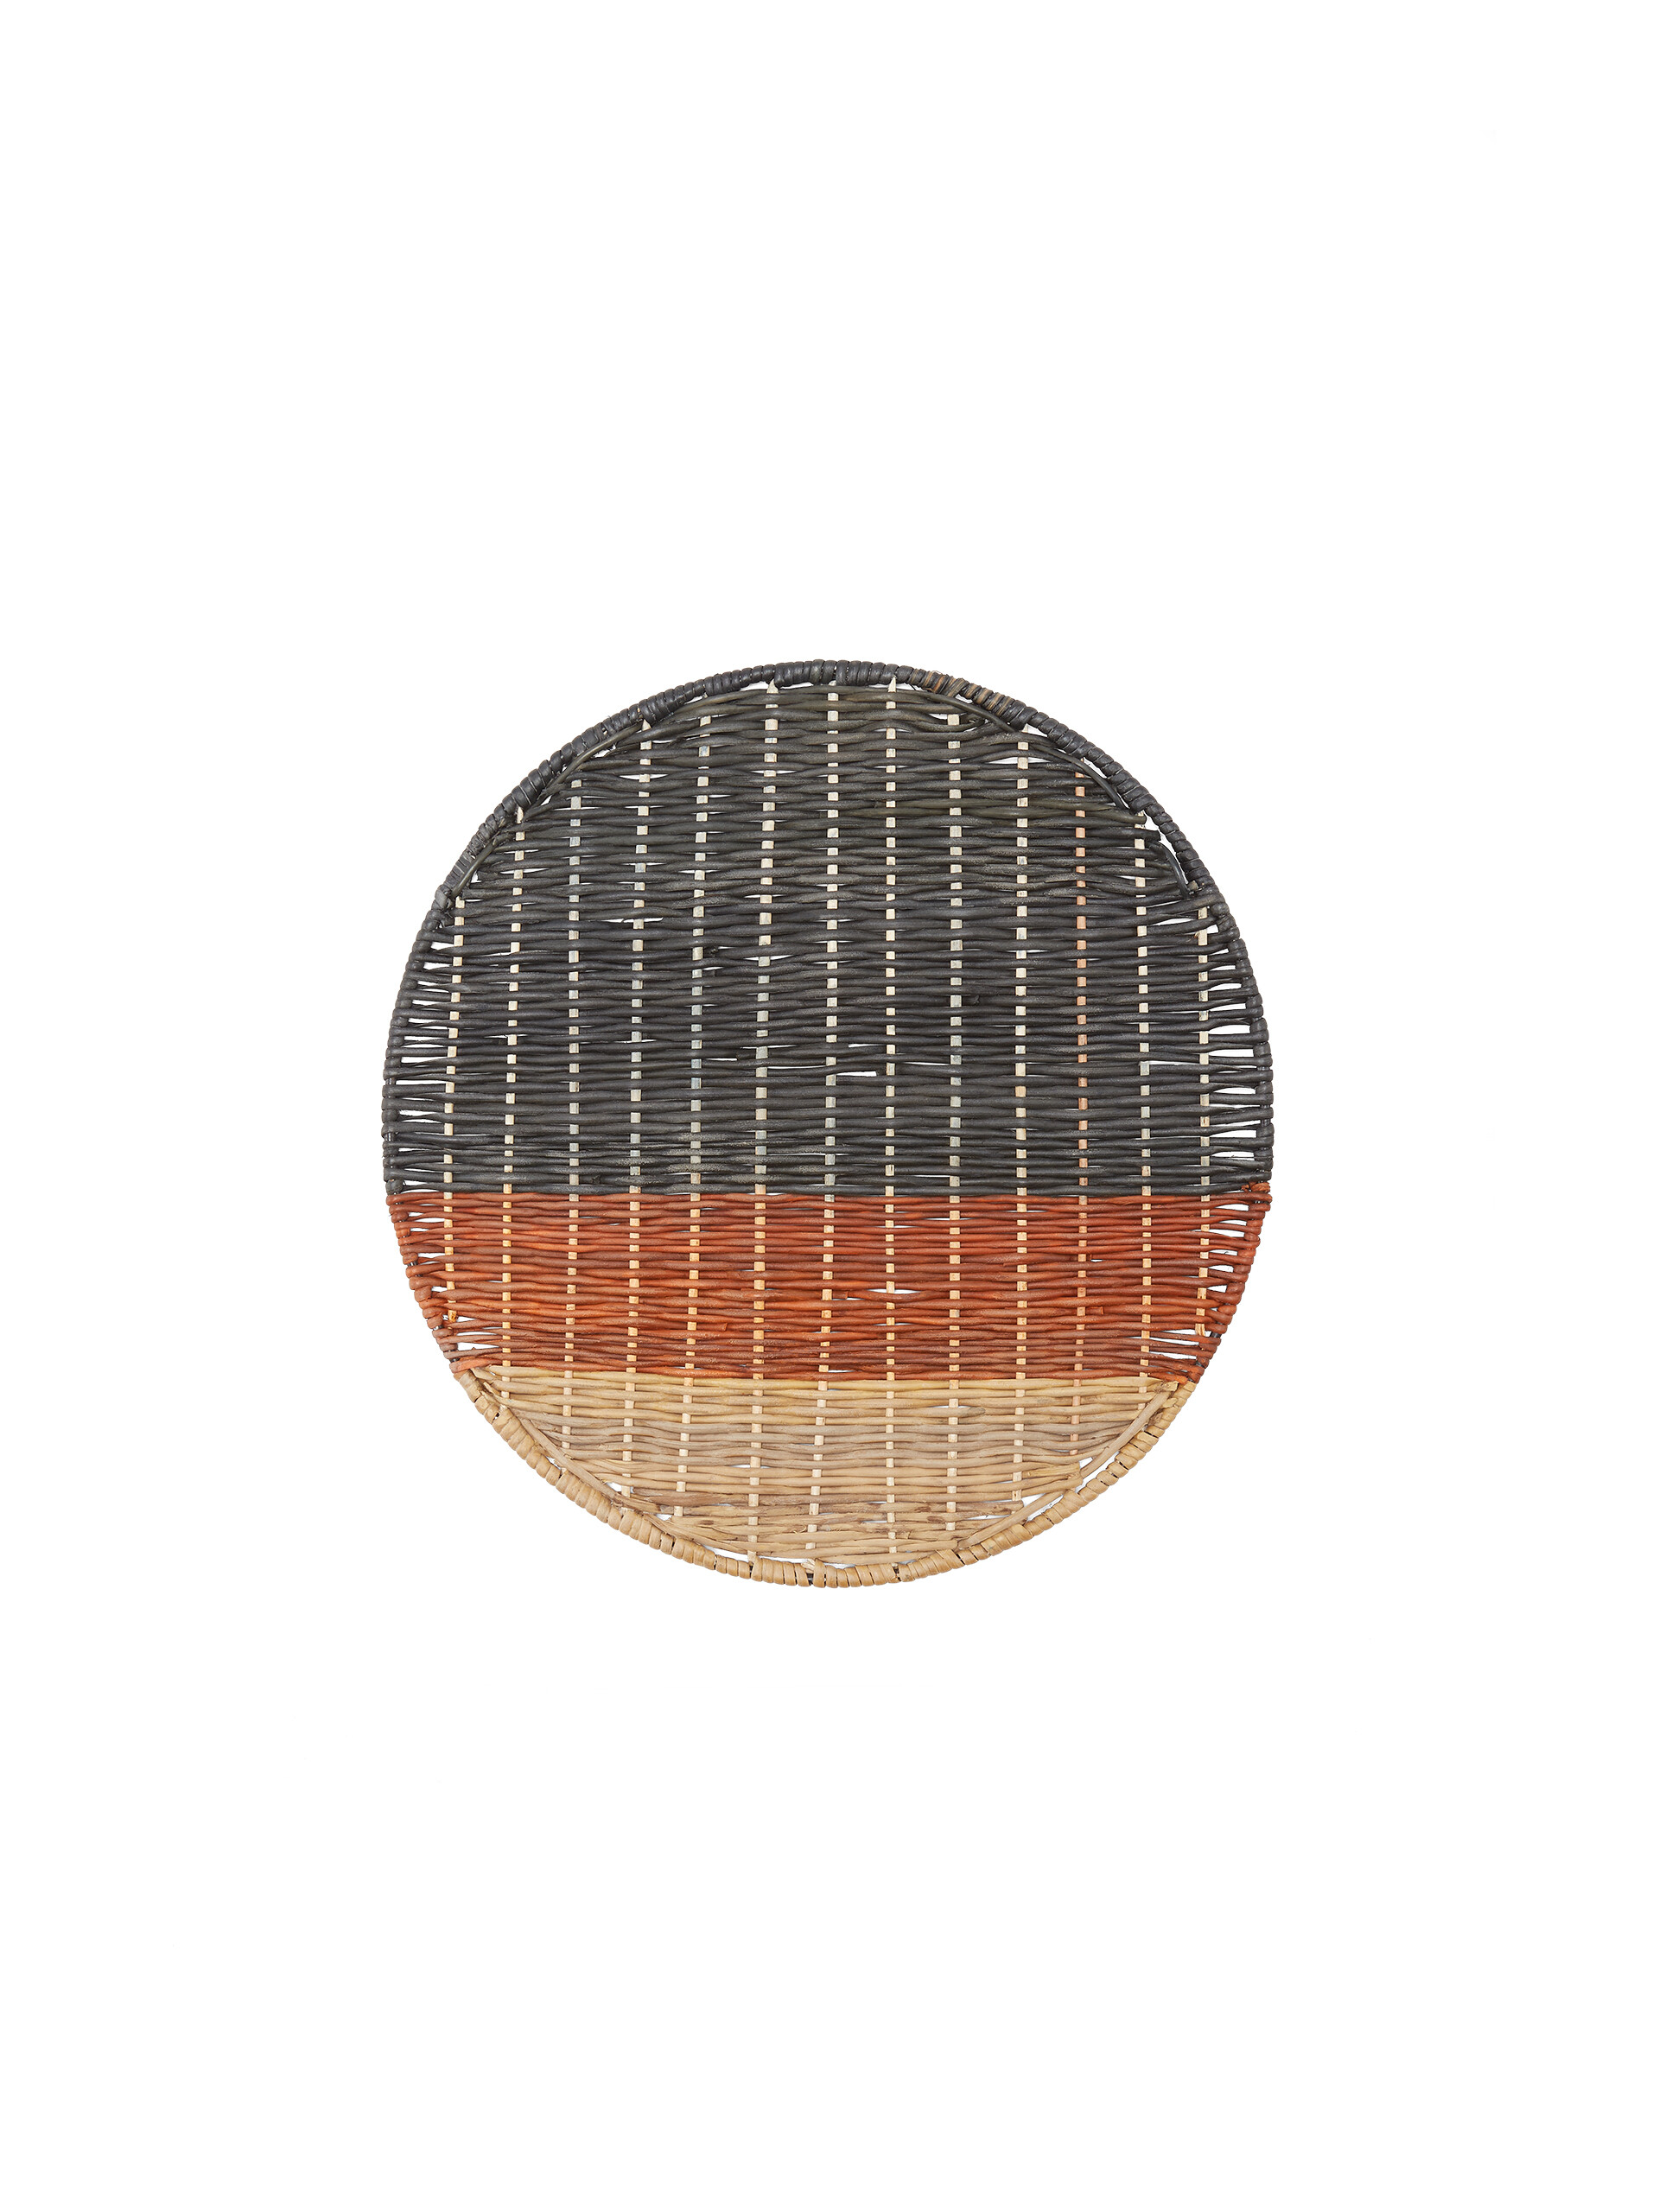 MARNI MARKET round placemat with colour-block motif in iron and beige, burgundy and black wicker - Home Accessories - Image 2